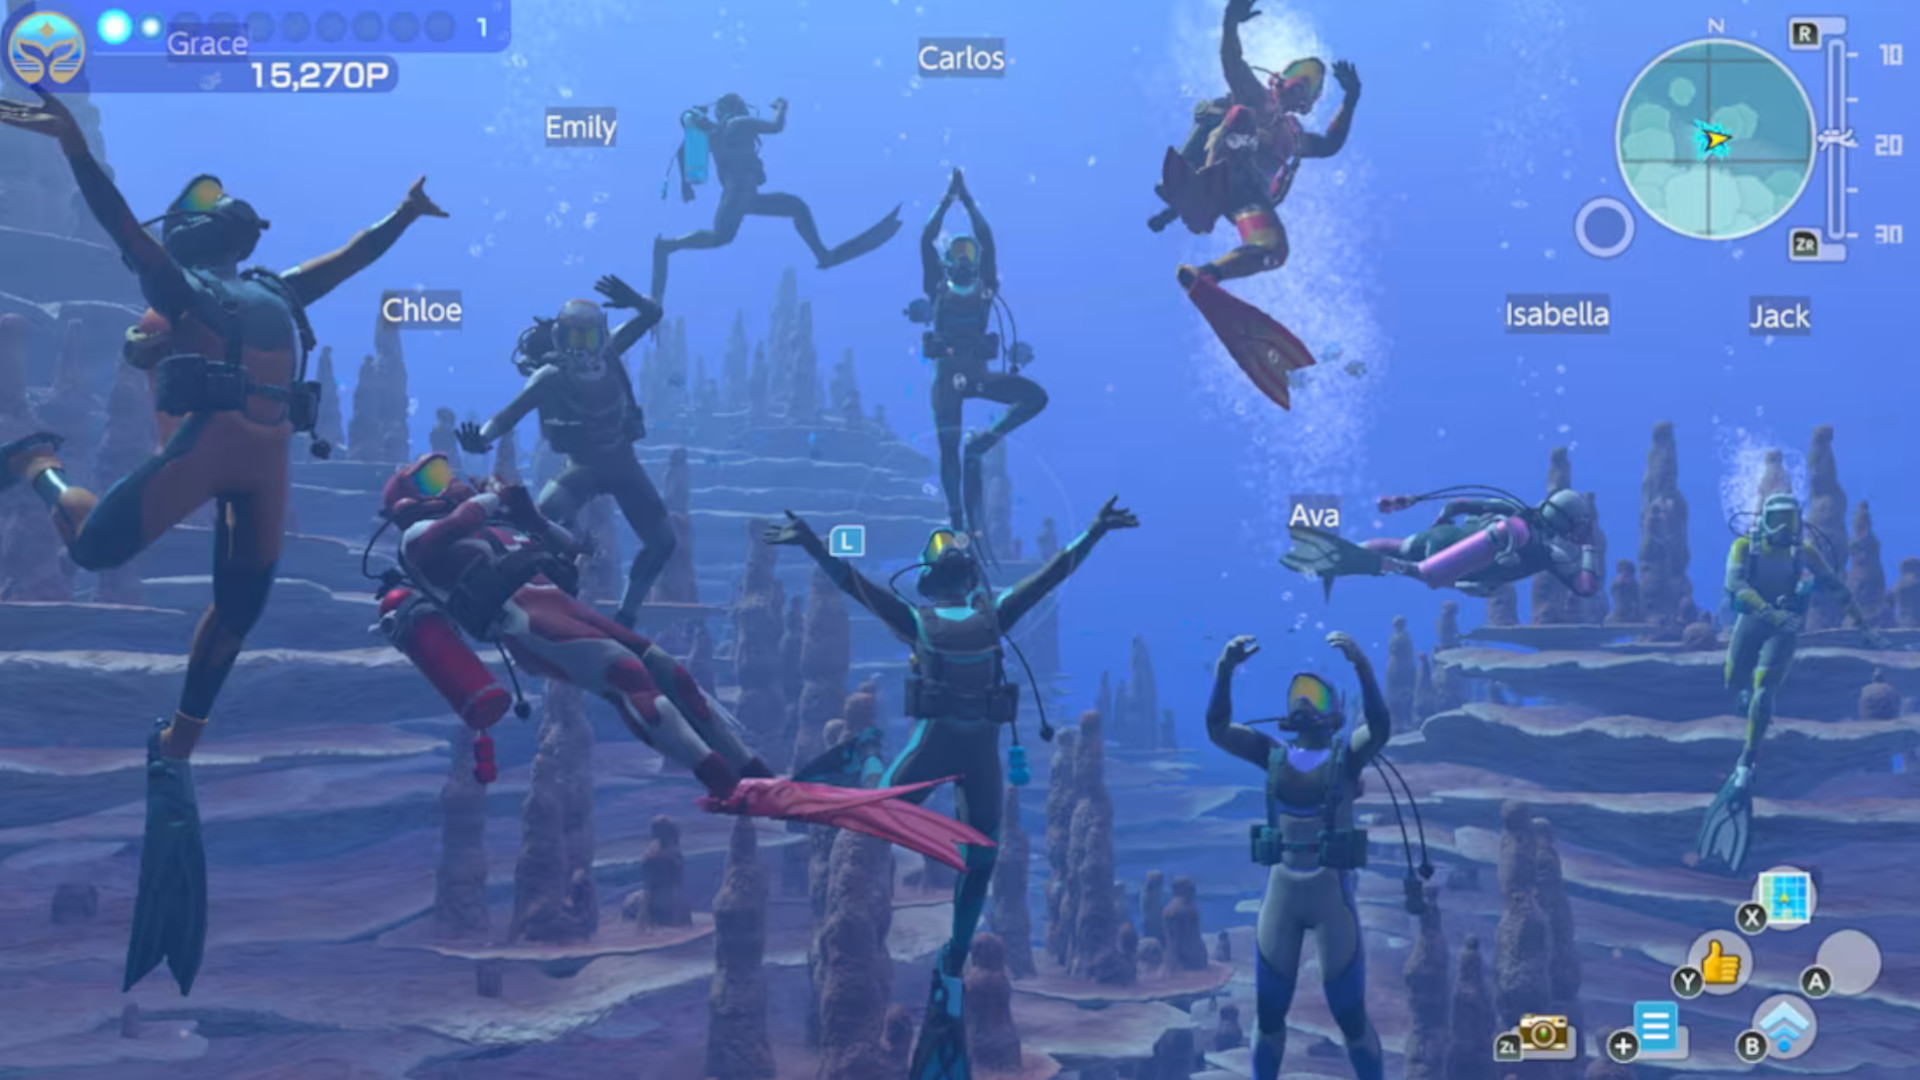 After 15 years, the cult classic Wii diving series Endless Ocean is coming back on Switch, and this time it’s got 30-player co-op